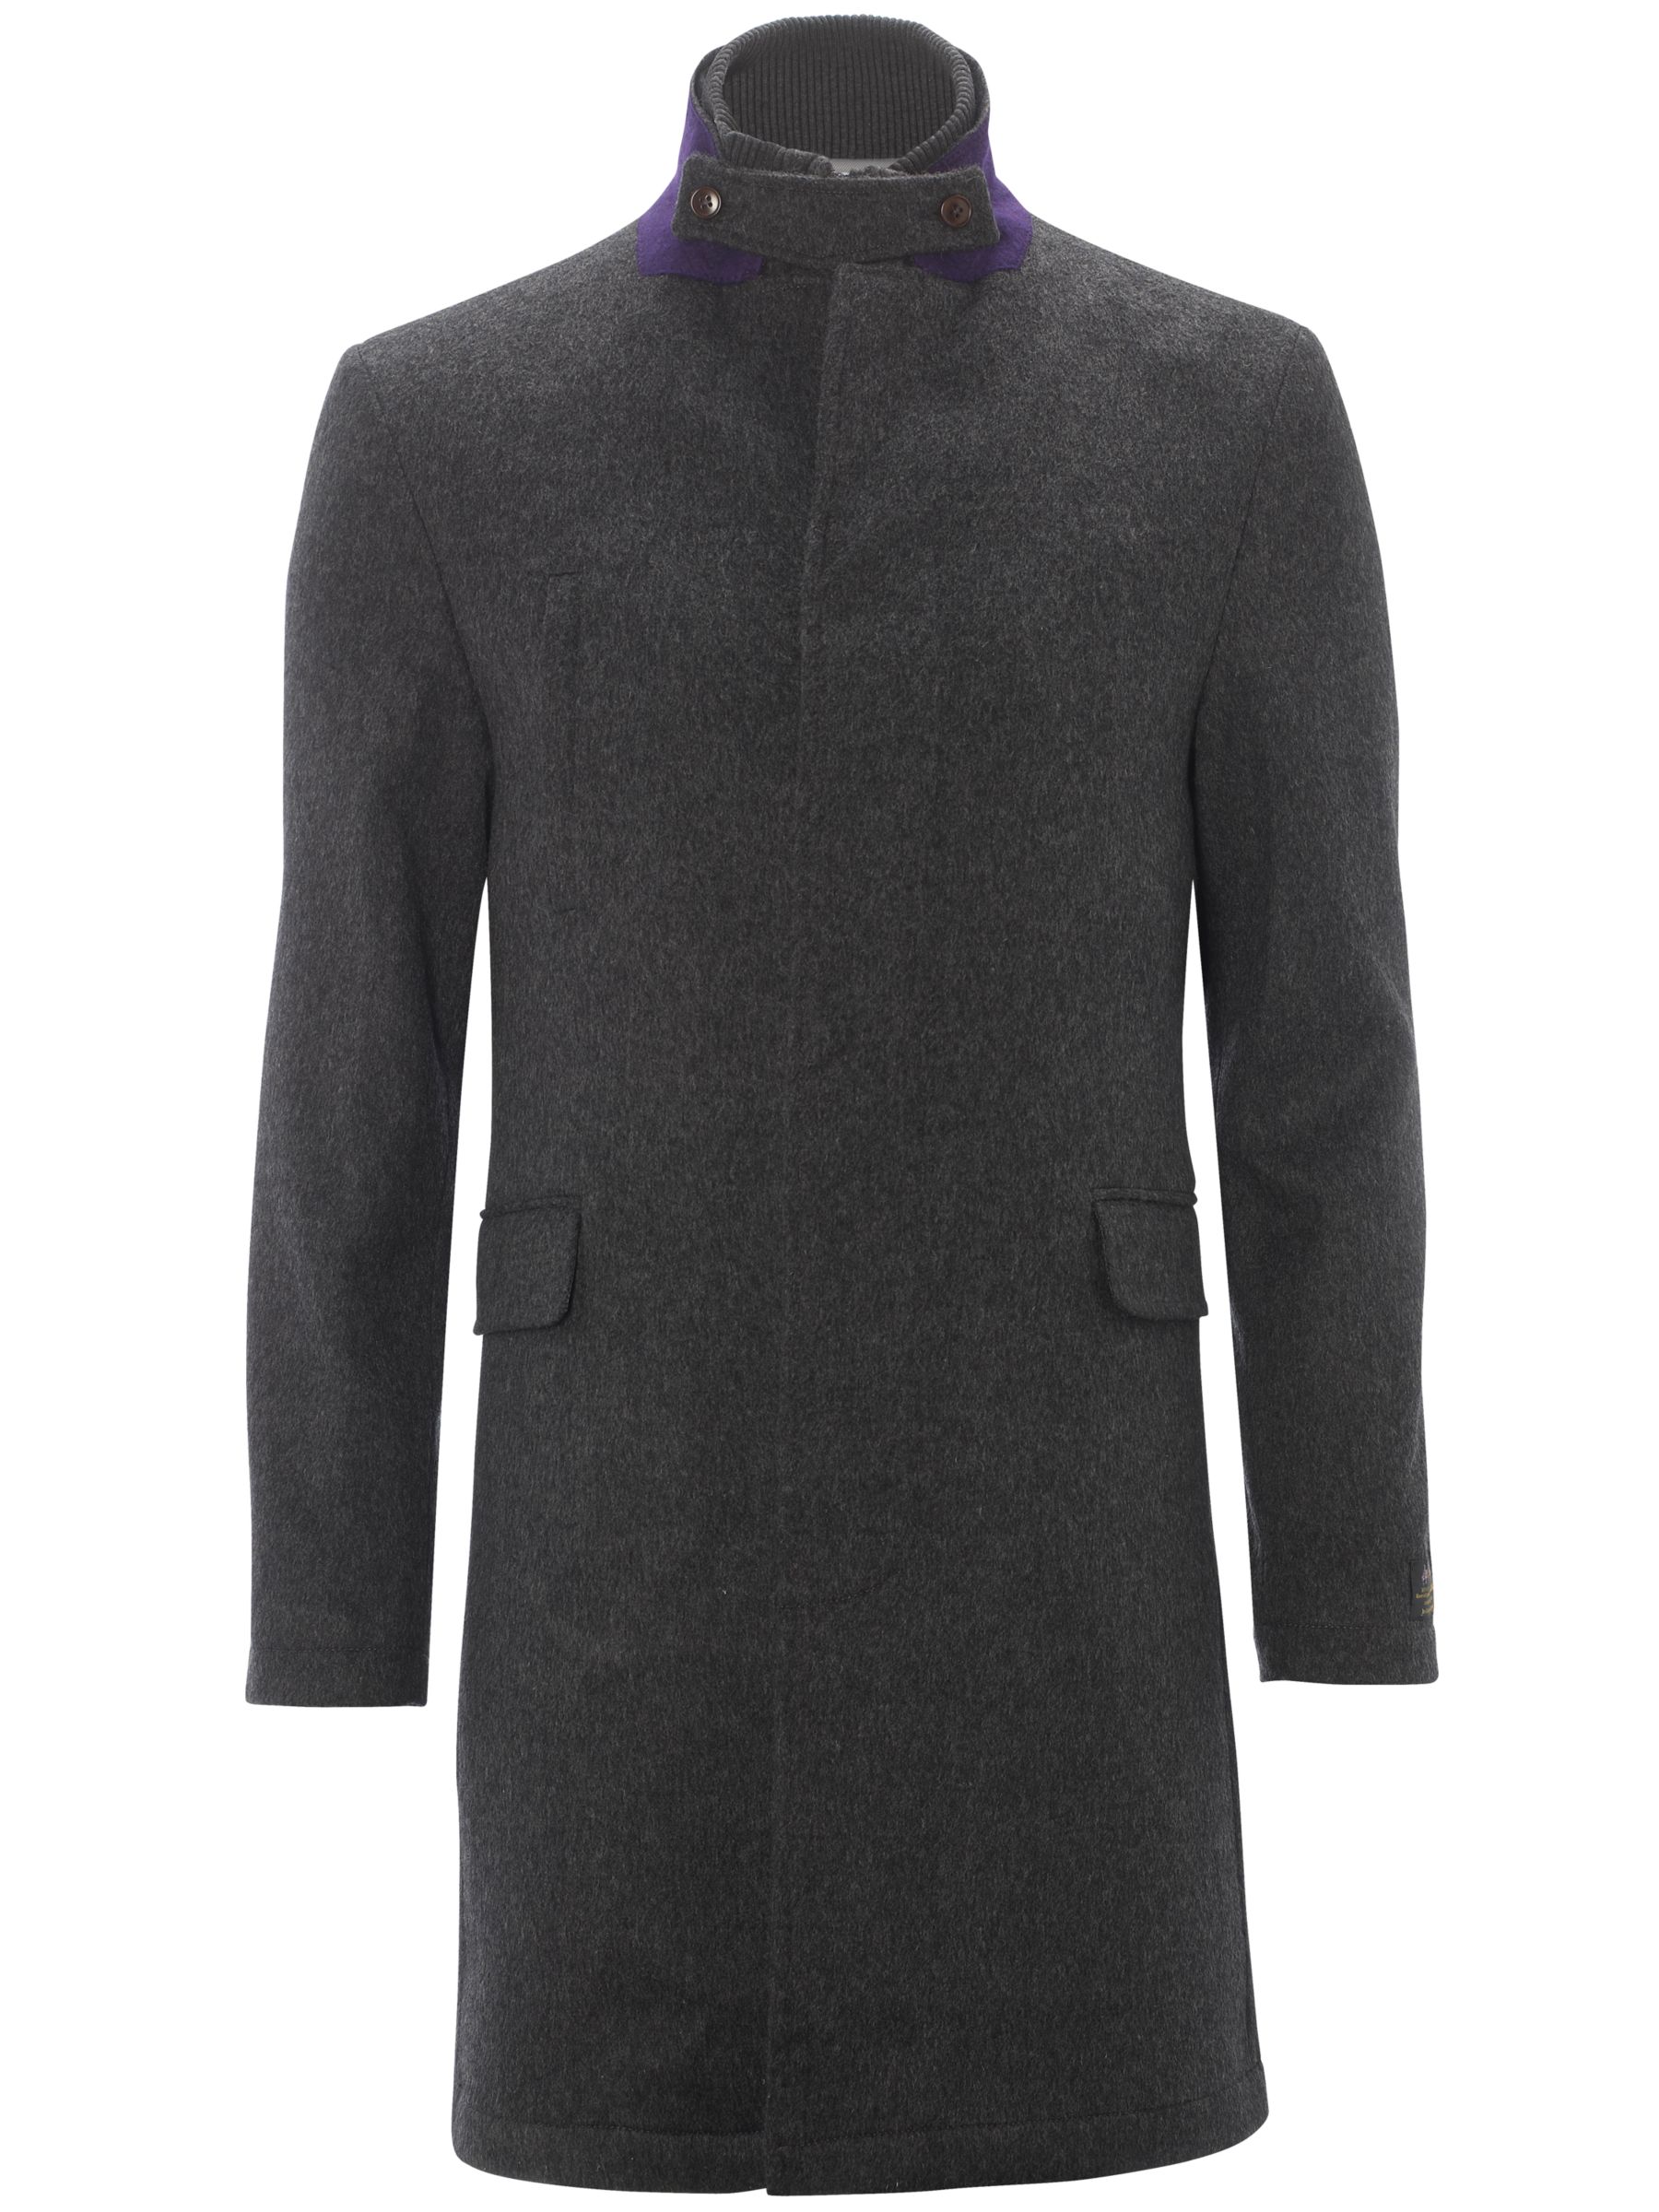 Joe Casely-Hayford for John Lewis Paris Cashmere Blend 2-in-1 Coat, Charcoal at JohnLewis